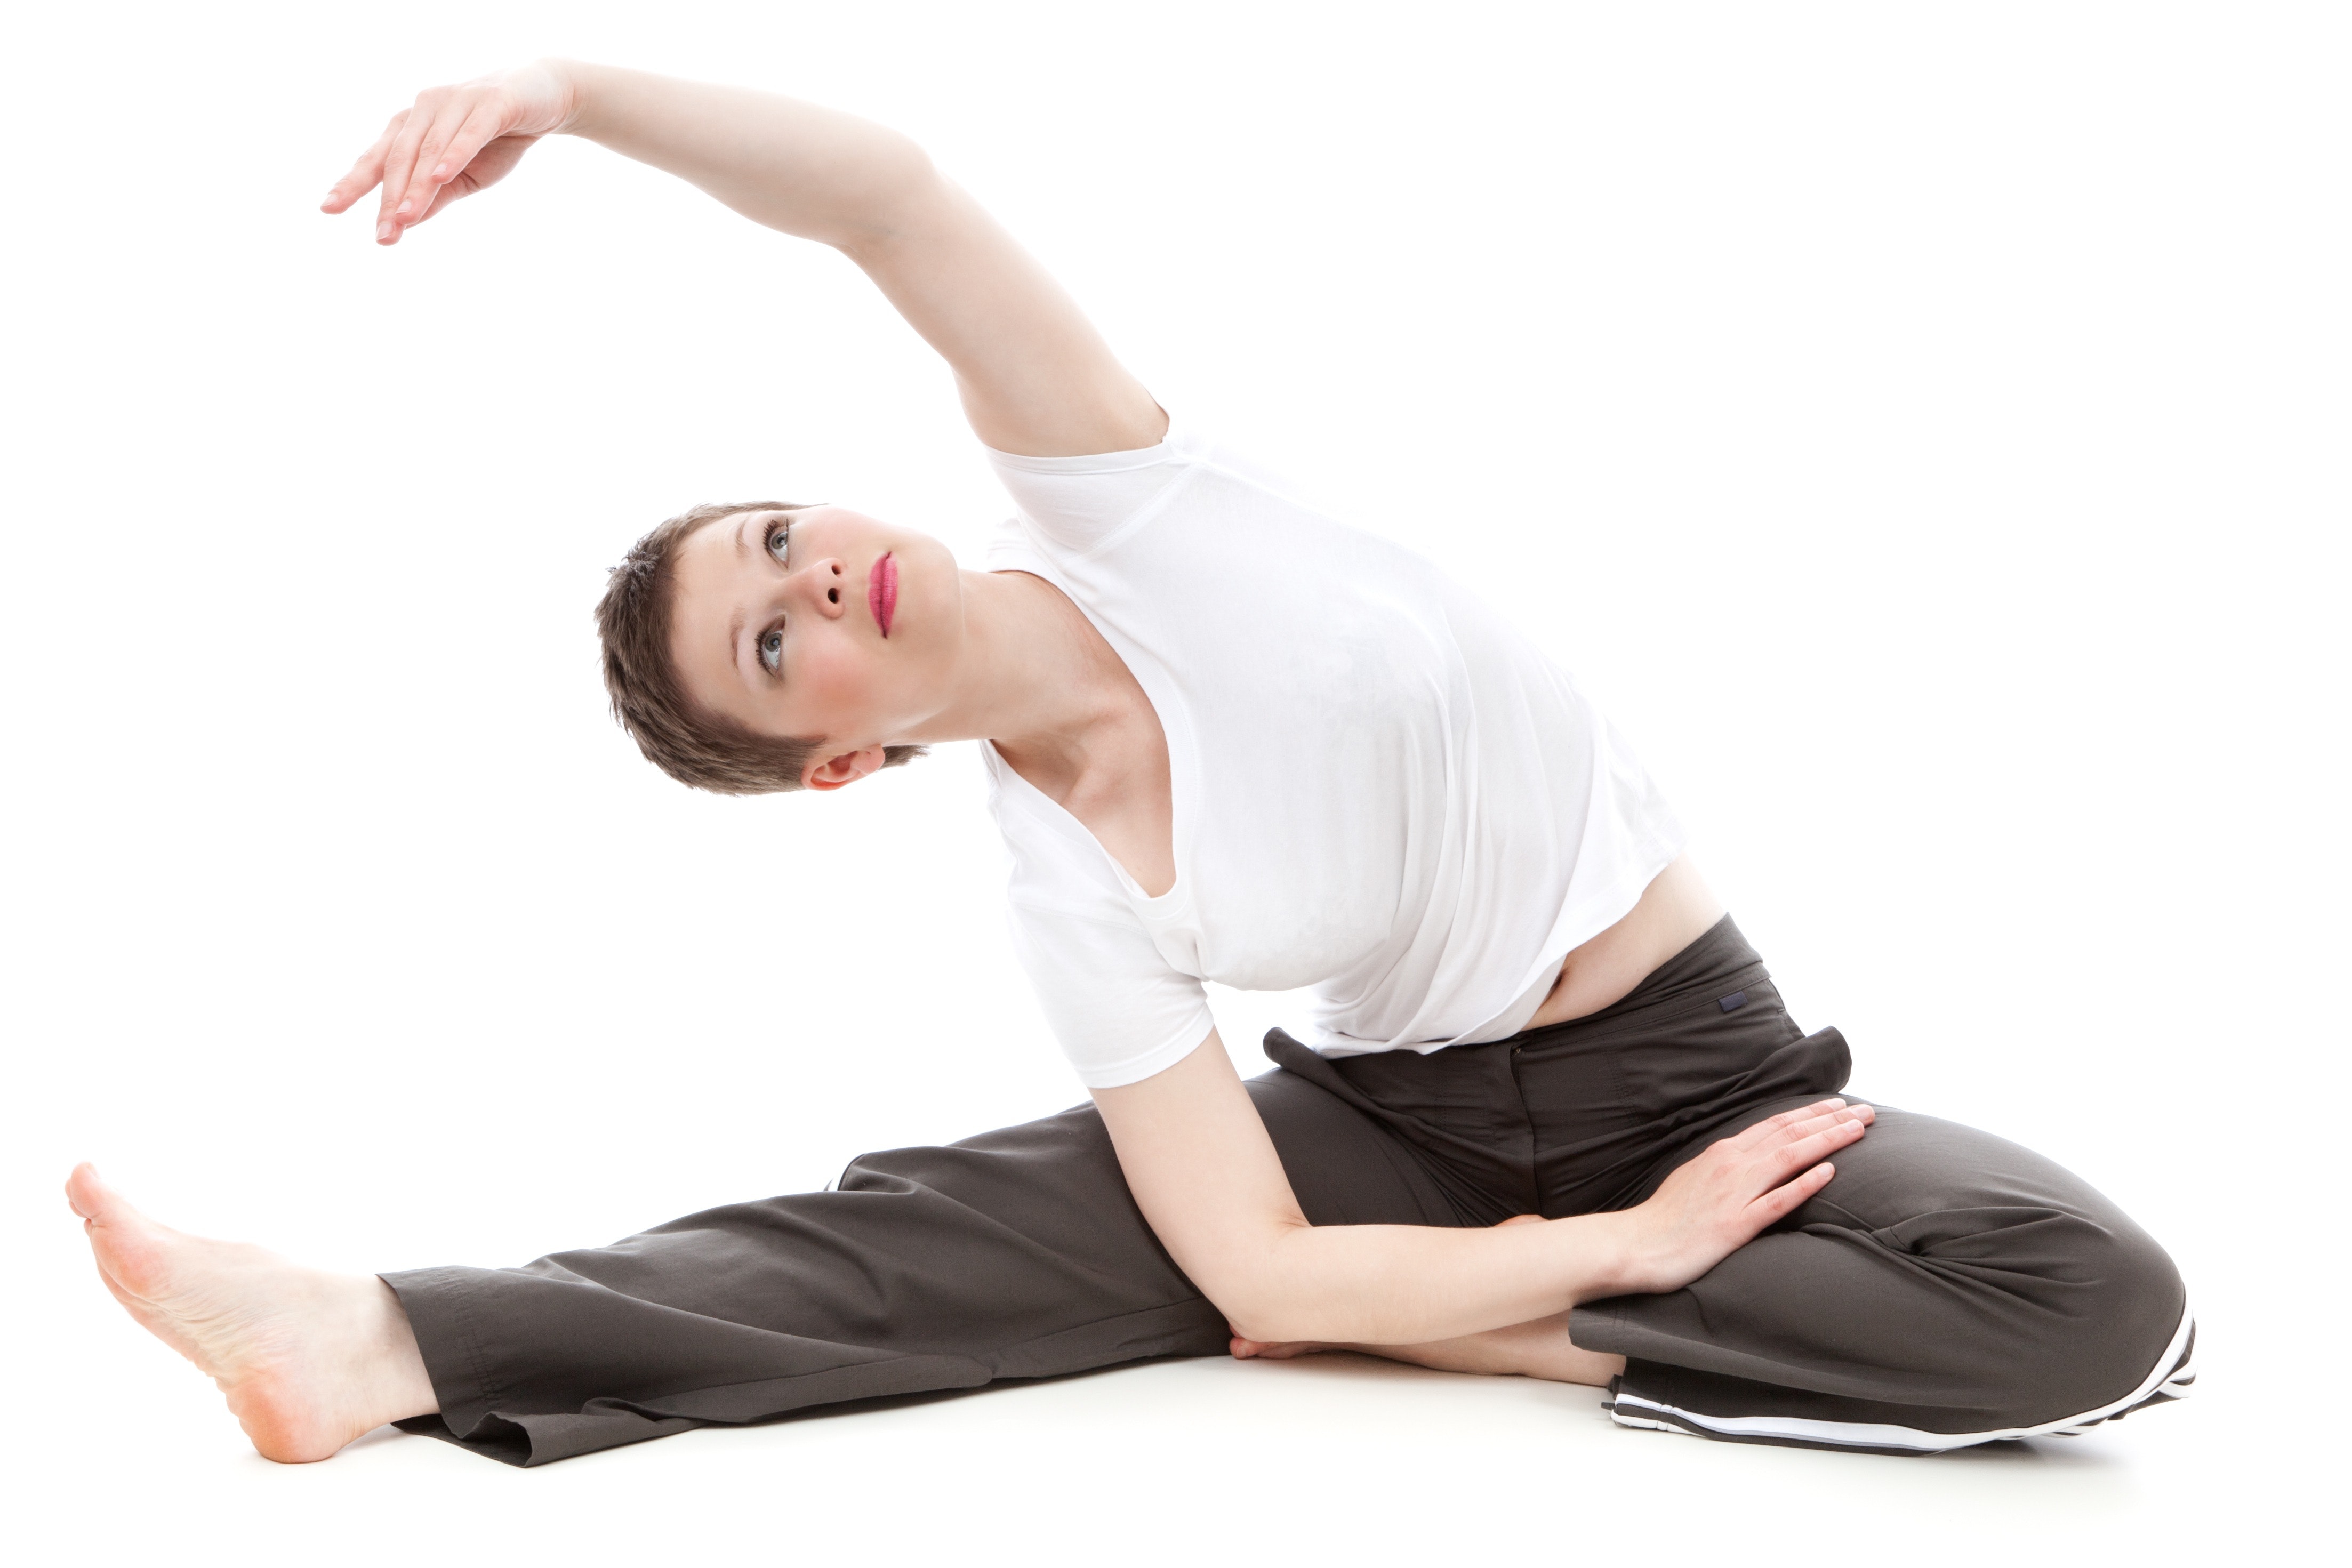 Brunette short haired woman stretching arm overhead in yoga pose photo